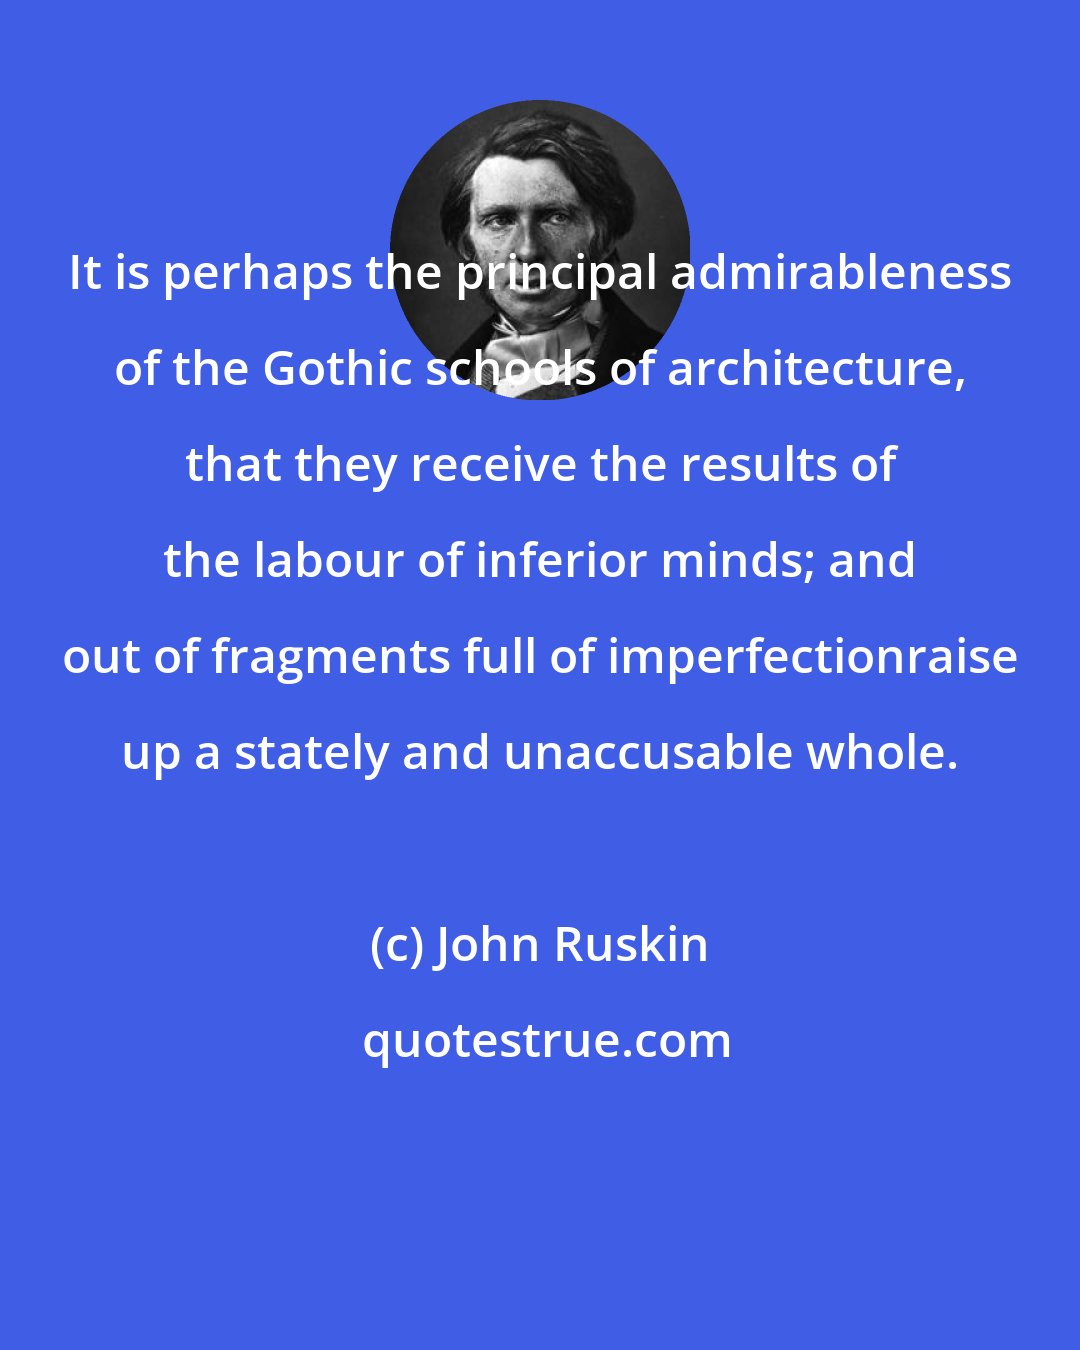 John Ruskin: It is perhaps the principal admirableness of the Gothic schools of architecture, that they receive the results of the labour of inferior minds; and out of fragments full of imperfectionraise up a stately and unaccusable whole.